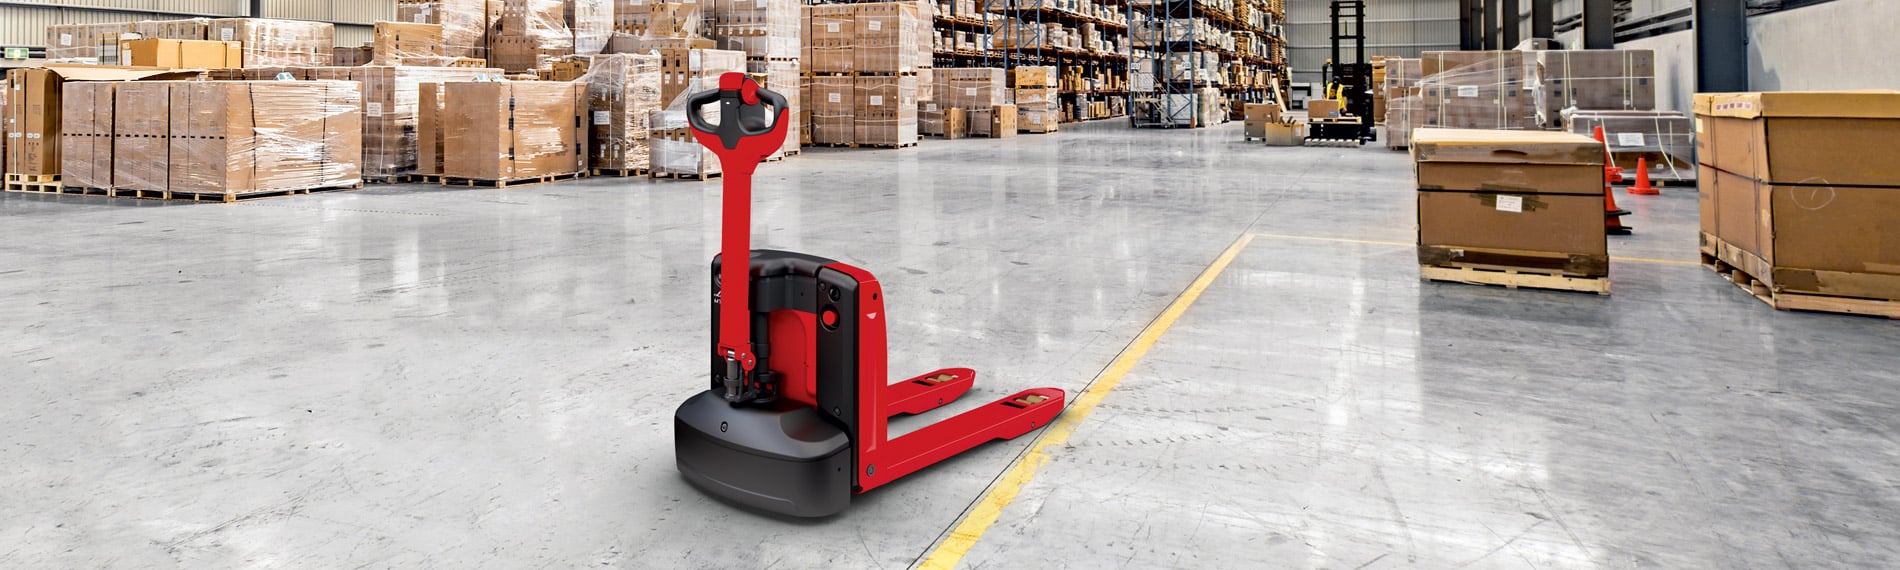 Linde electric pallet truck MT 15 in stock